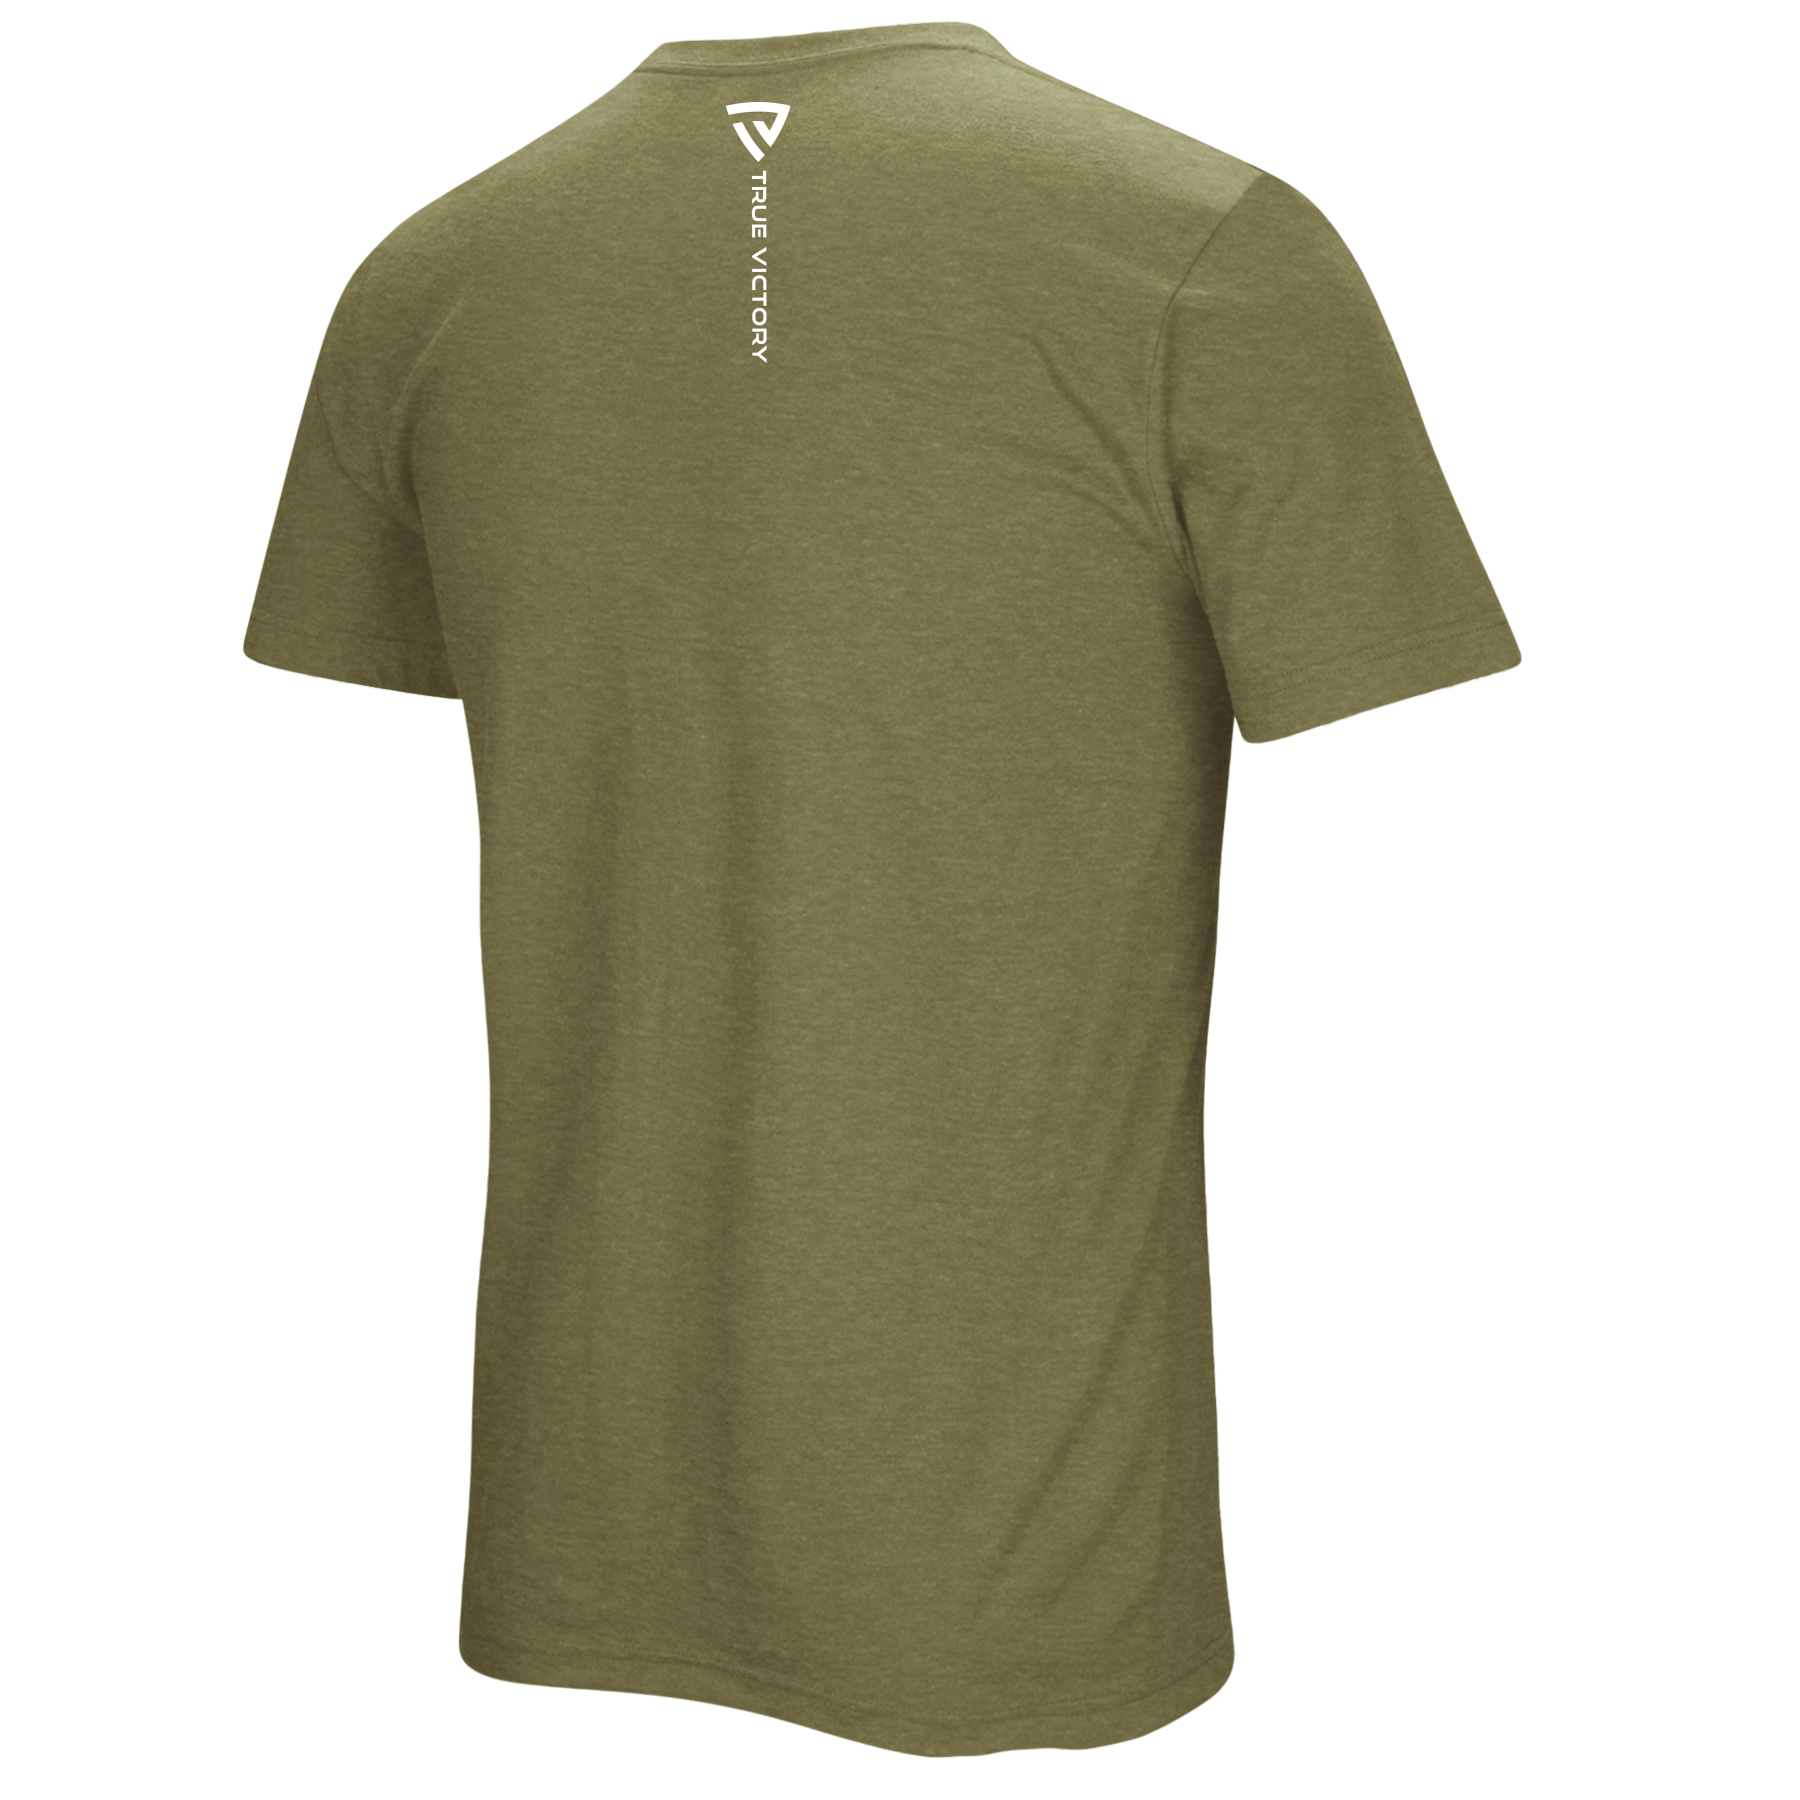 Men's Victorious Military Green Tee